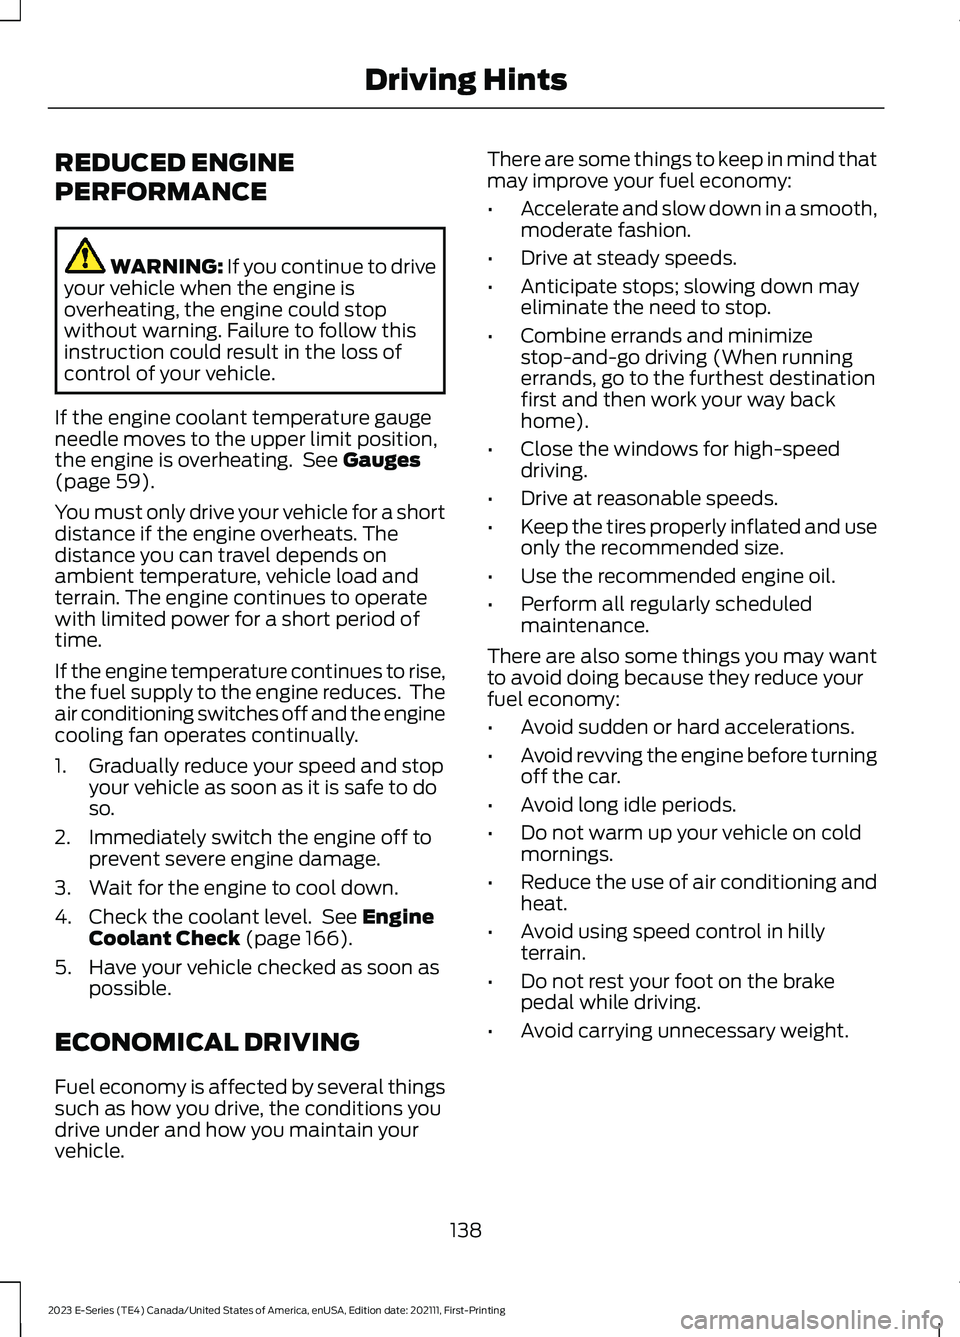 FORD E SERIES 2023  Owners Manual REDUCED ENGINE
PERFORMANCE
WARNING: If you continue to driveyour vehicle when the engine isoverheating, the engine could stopwithout warning. Failure to follow thisinstruction could result in the loss